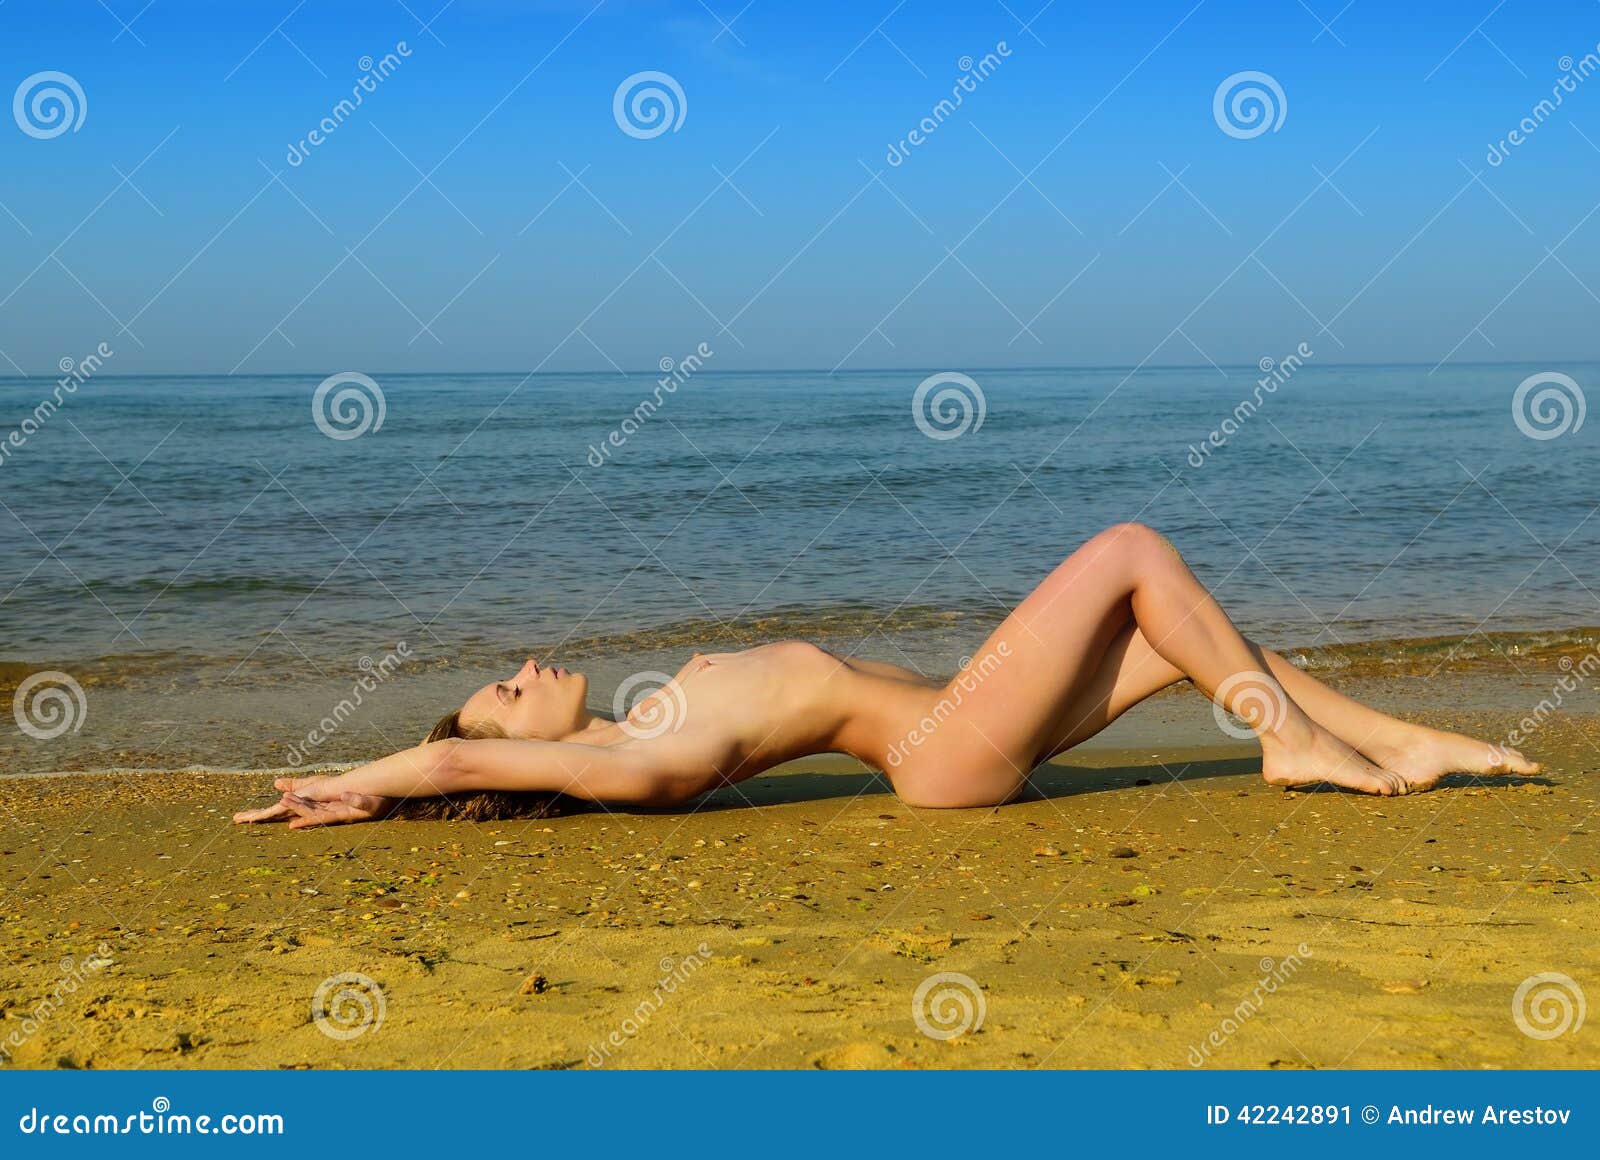 Nude girls laying down on the beach